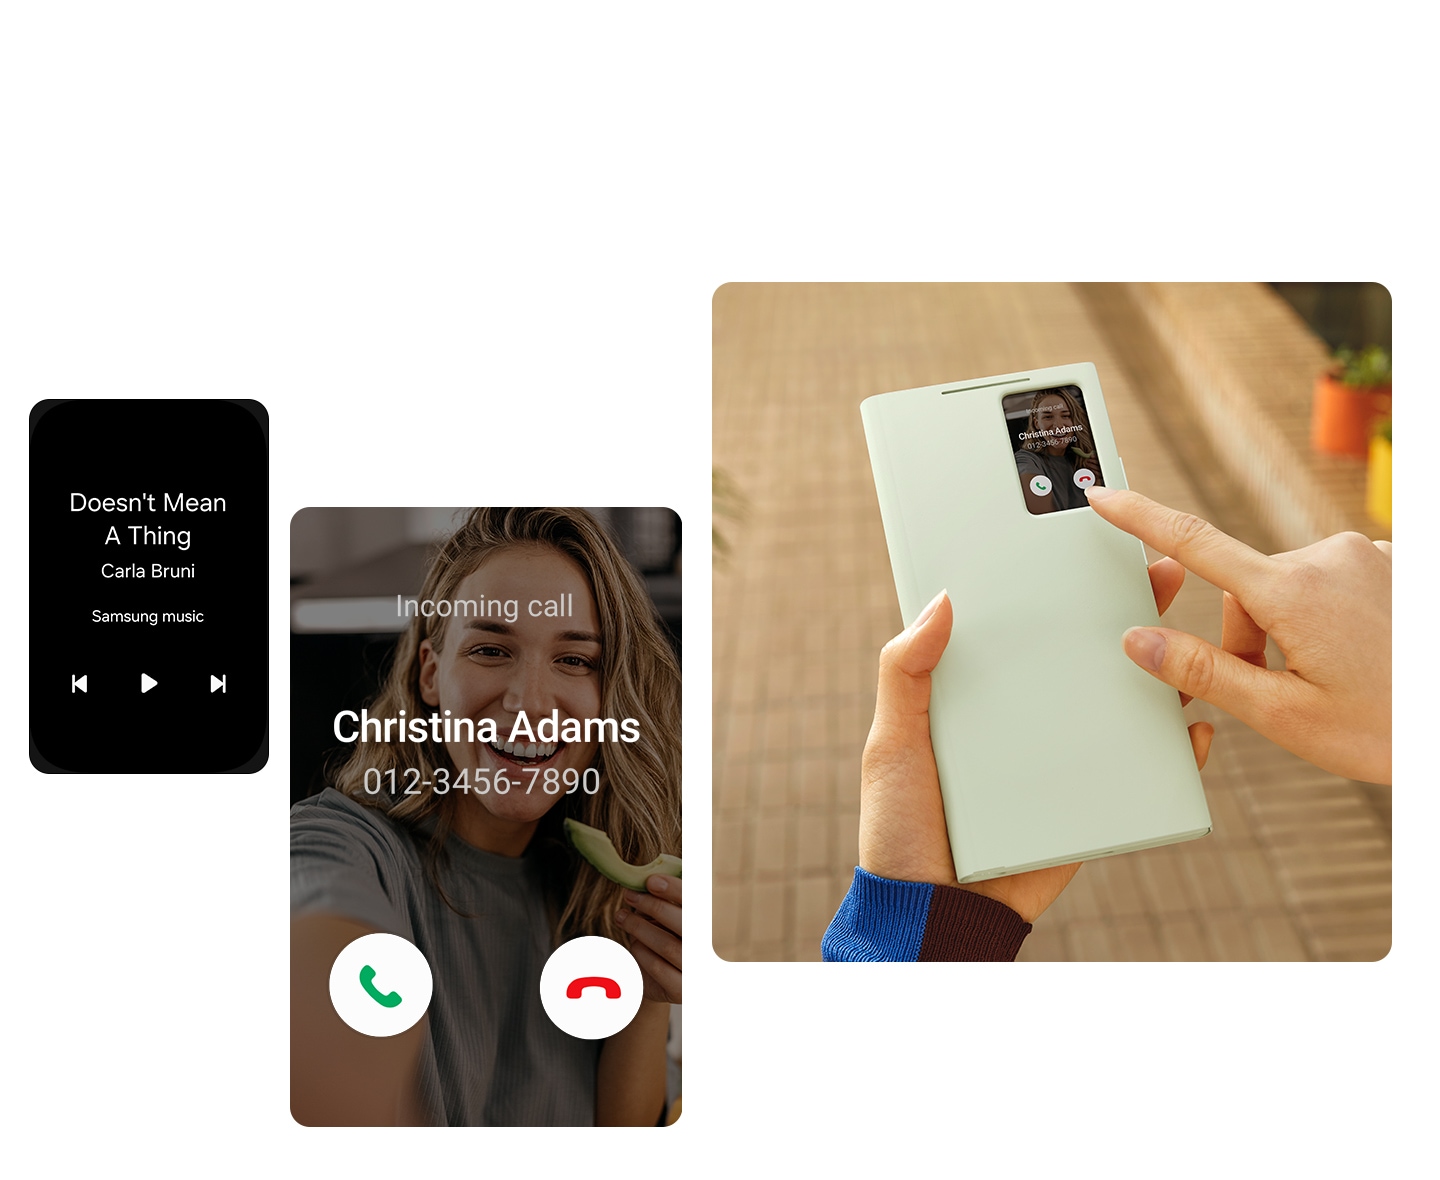 The S-View window on the left shows a music screen, next to it is the screen of an incoming call and on the right is a person interacting with the S-View window without the need to open the case.